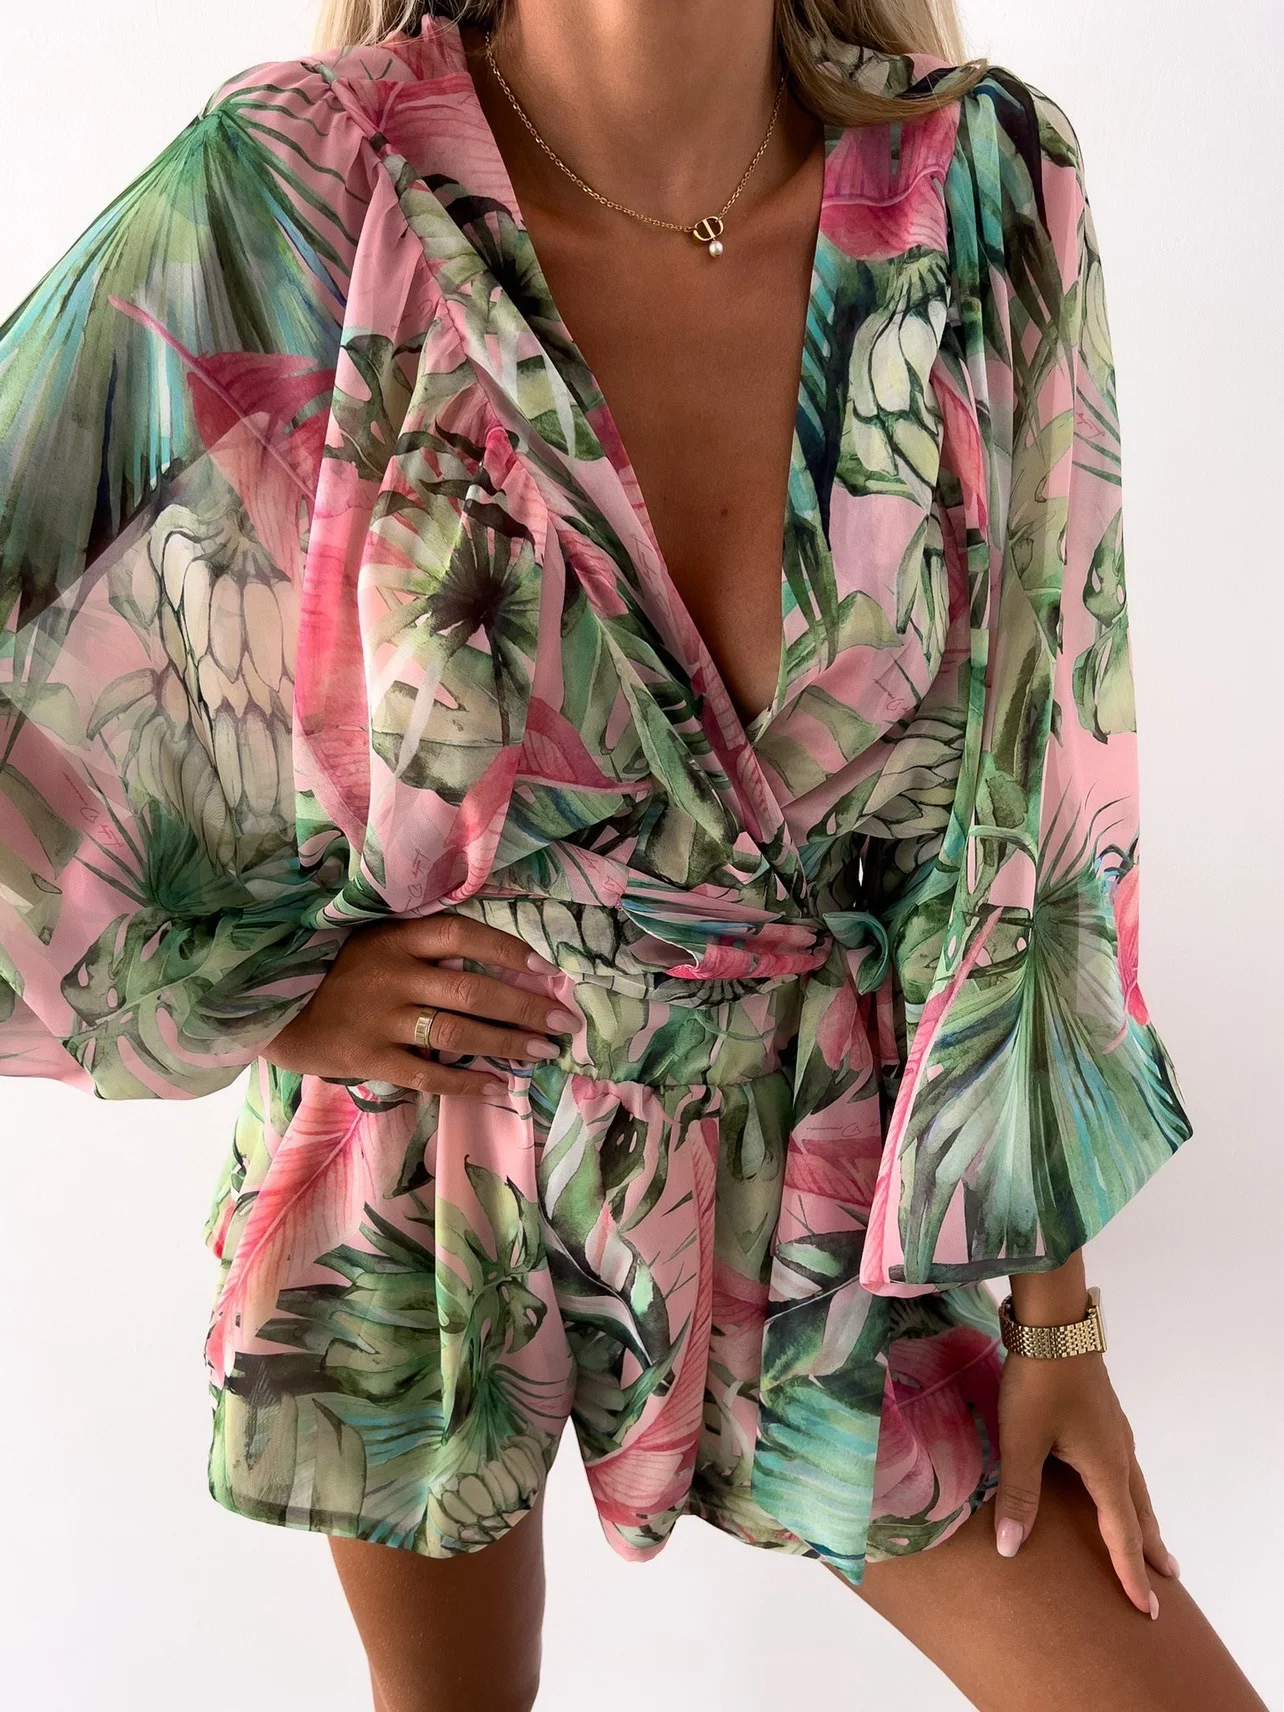 2021 summer purple floral print jumpsuits women harajuku loose deep v neck lantern sleeve playsuit casual belt short jumpsuit 2023 Sexy Deep V Neck Jumpsuit For Women Summer Casual Boho Beach Vacation Outfit Fashion Print Lantern Sleeve Rompers Shorts